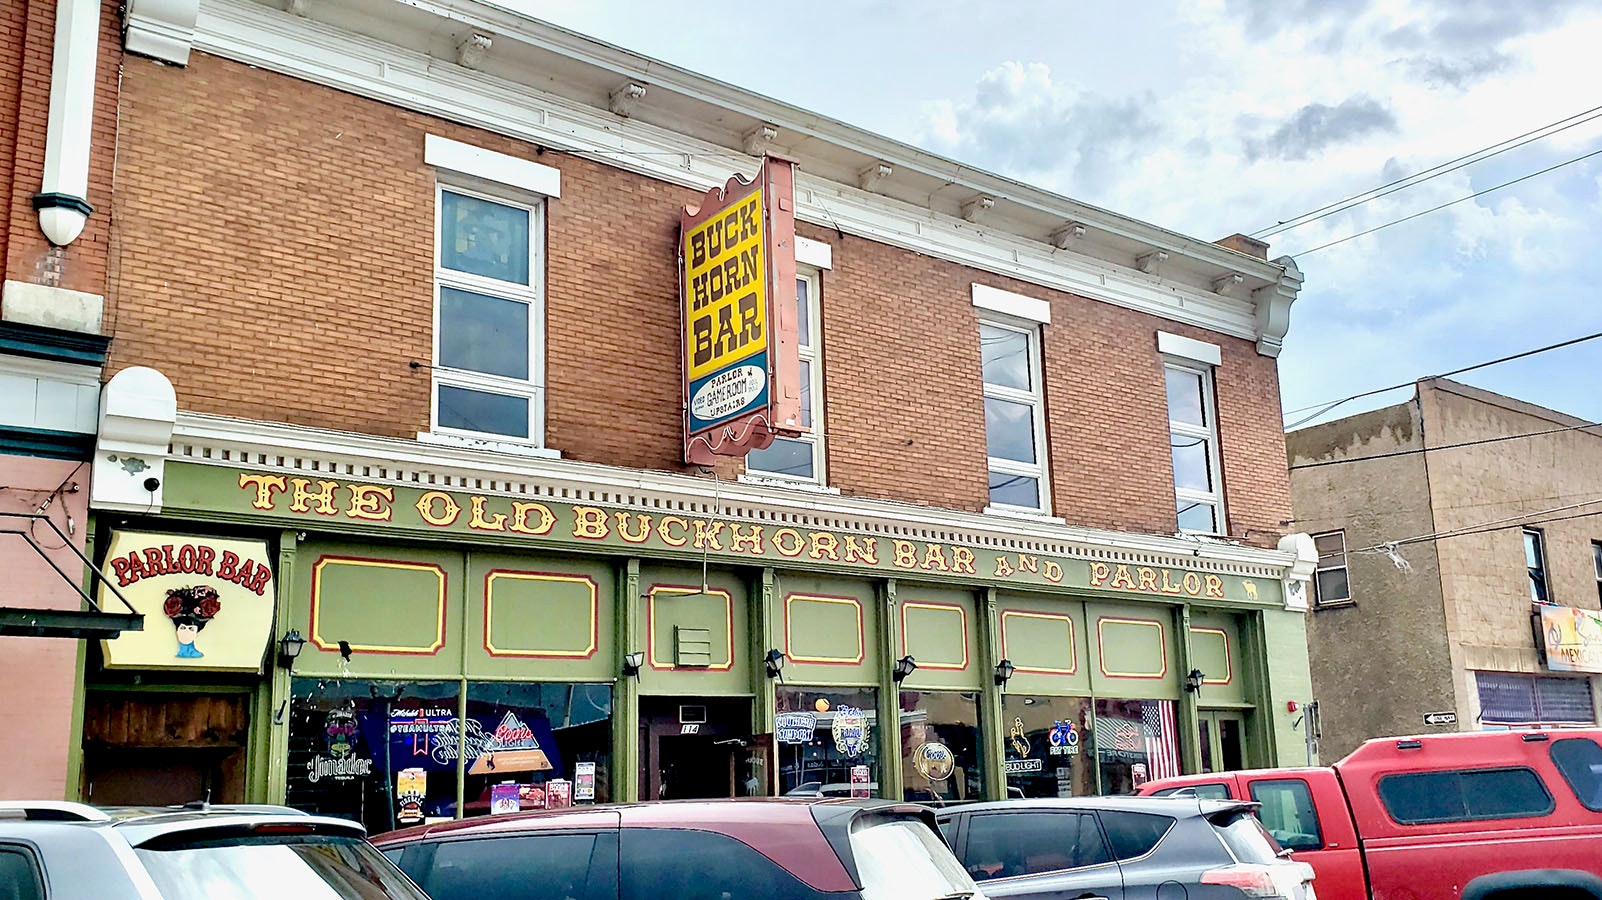 The historic and legendary Buckhorn Bar & Parlor in downtown Laramie, Wyoming, is for sale.